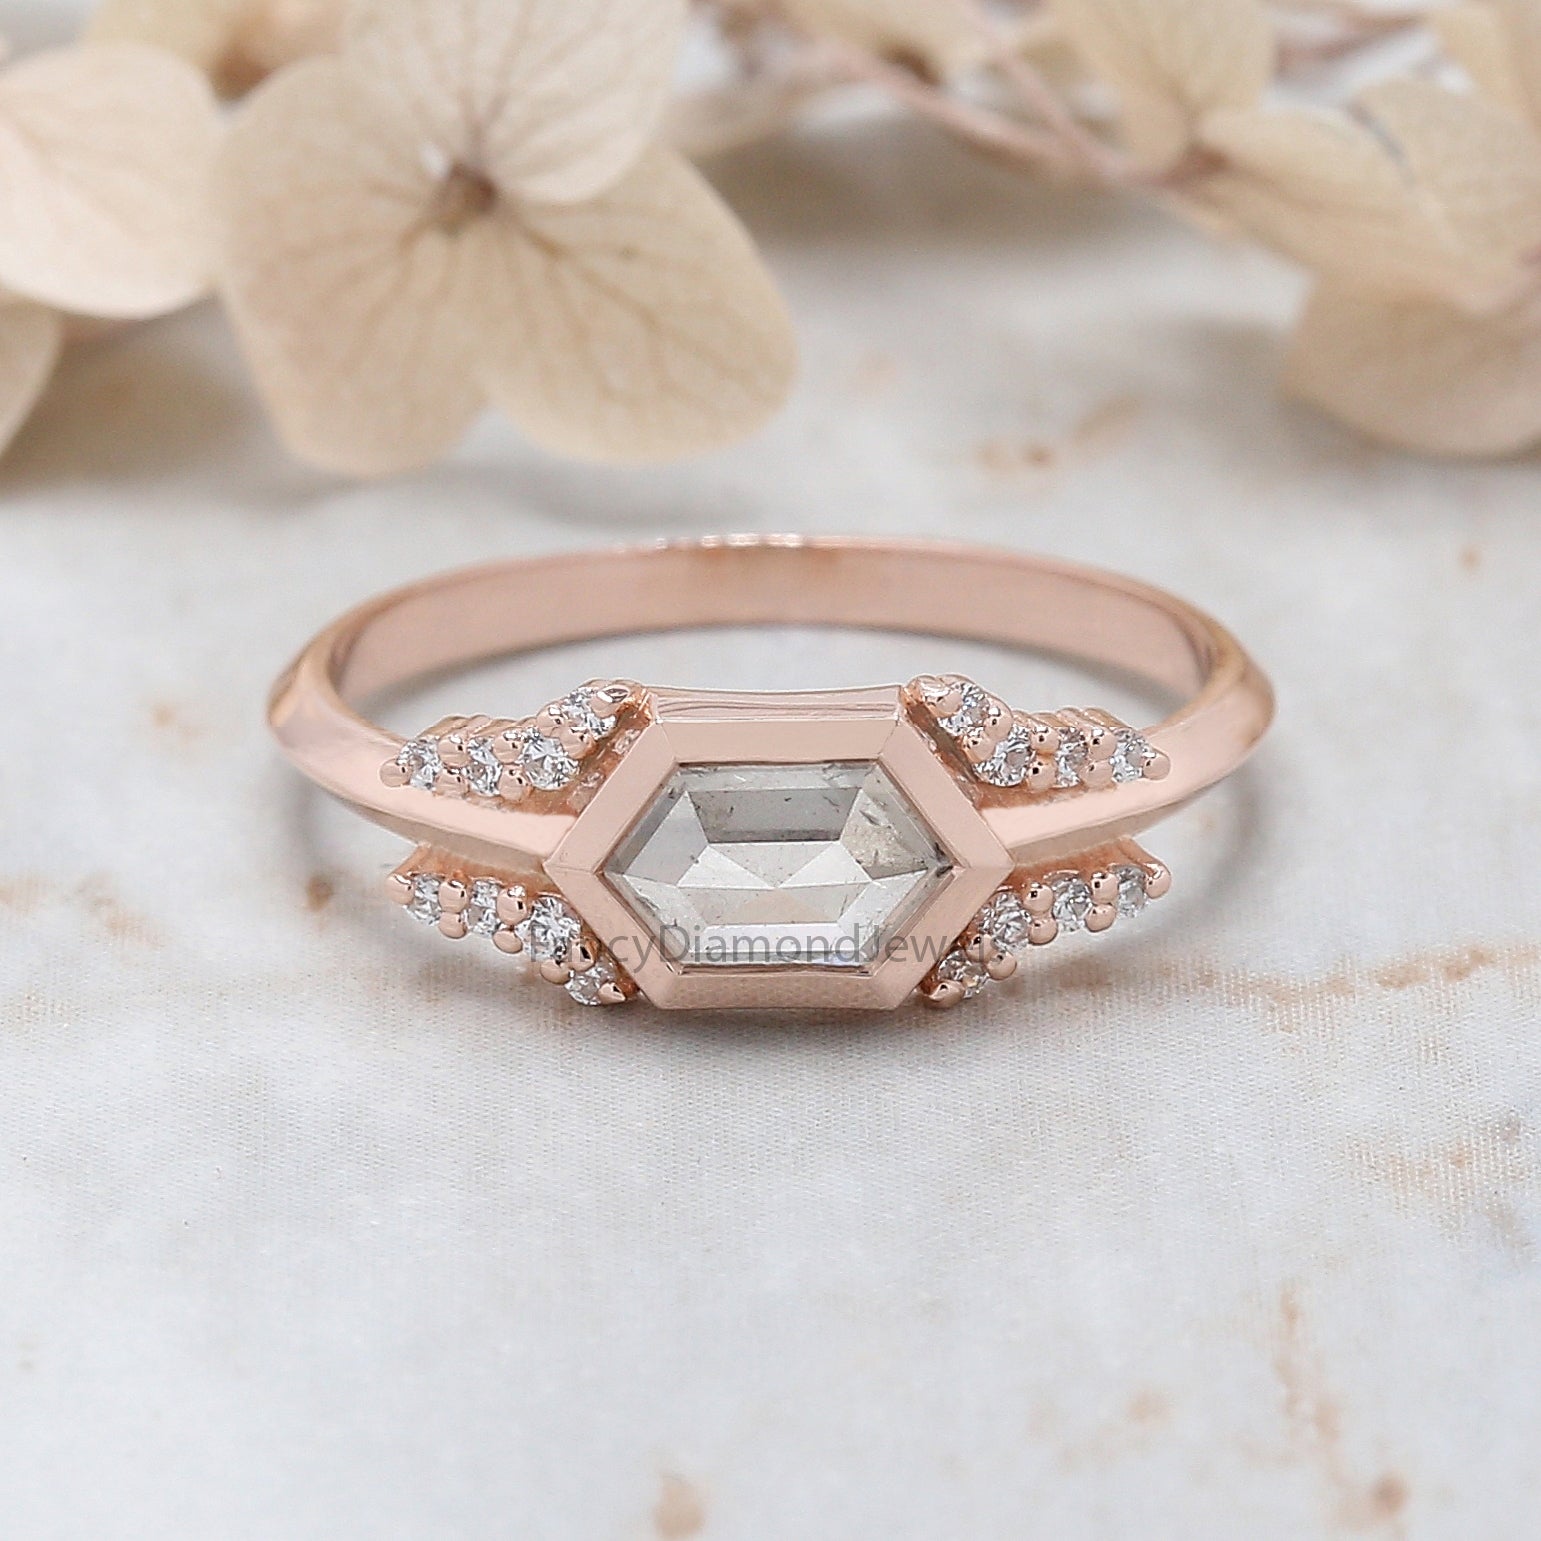 Hexagon Cut Grey Color Diamond Ring 0.88 Ct 7.25 MM Hexagon Shape Diamond Ring 14K Rose Gold Silver Engagement Ring Gift For Her QL212